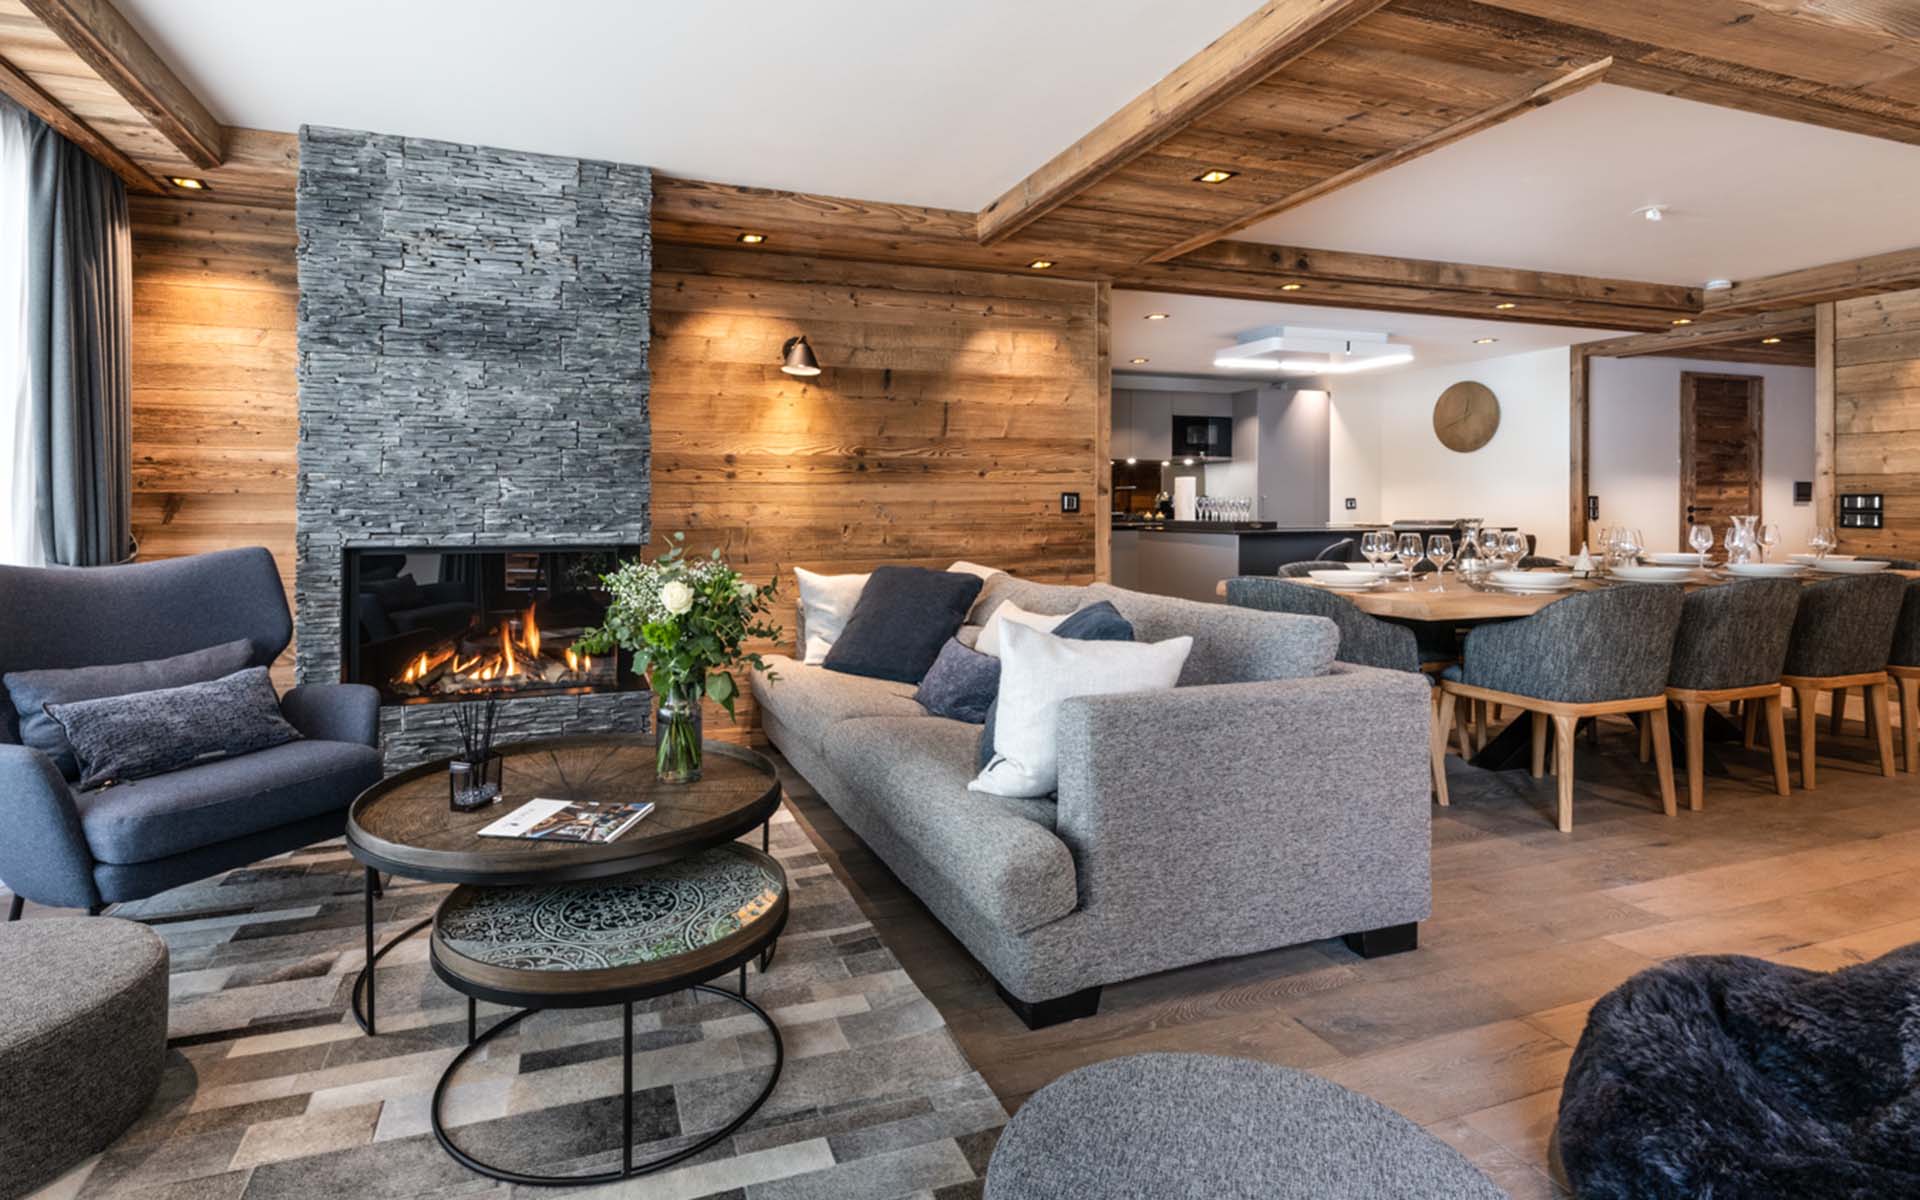 Vail Lodge Apartment A12, Val d’Isere